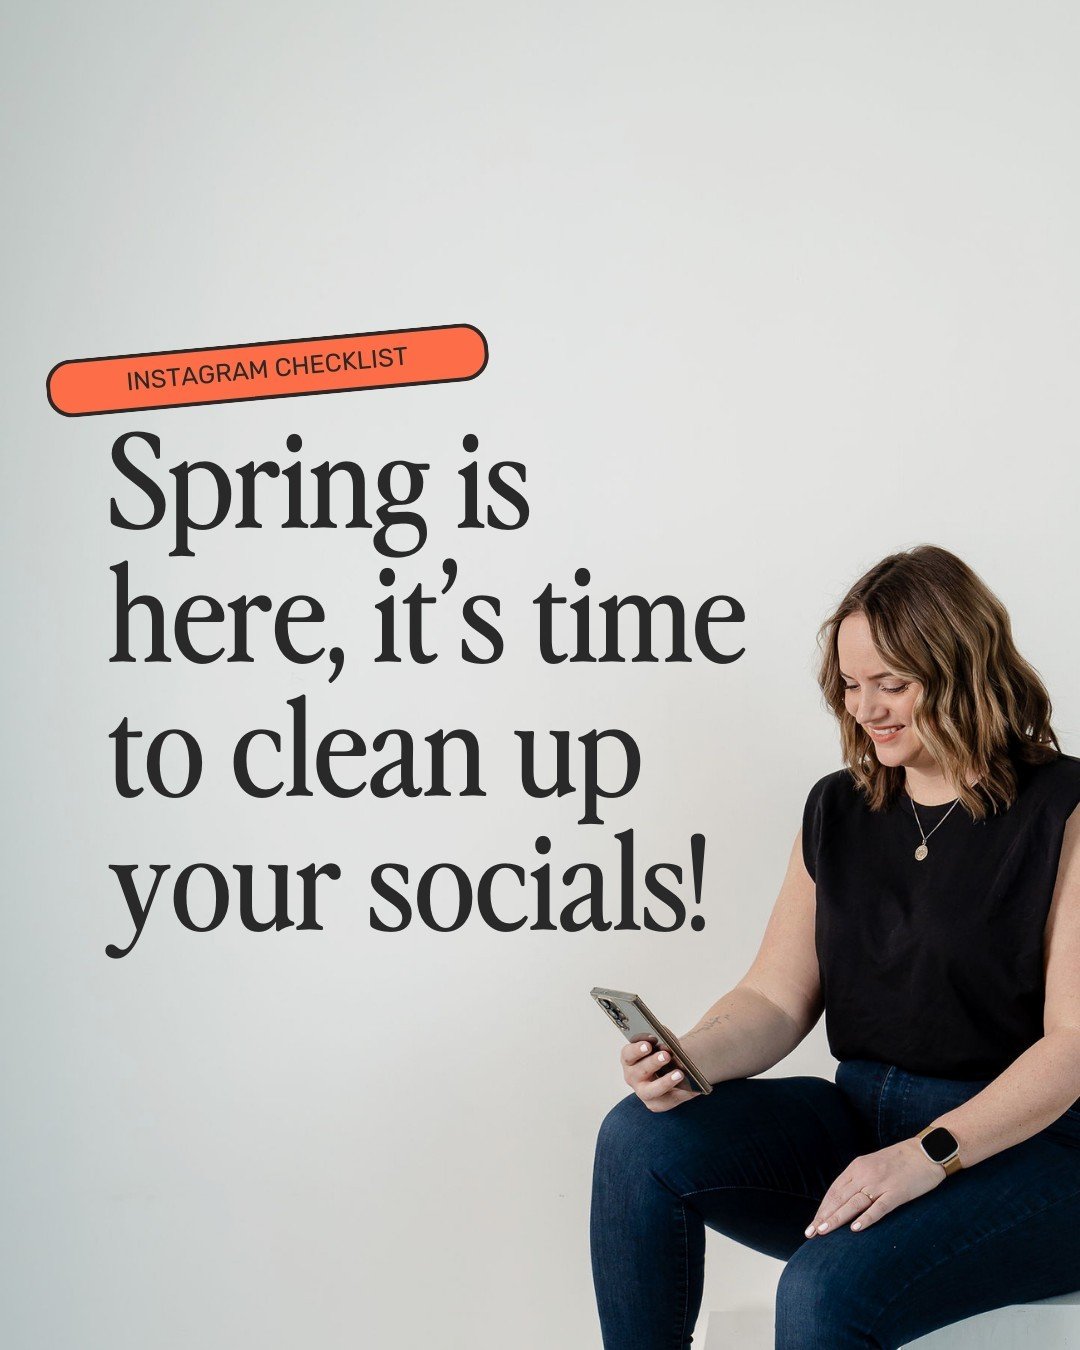 Spring is here, it&rsquo;s time to clean up your socials!⁠
⁠
Instagram checklist aka spring cleaning to-dos 🌷⁠
⁠
There are two main things on your Instagram that need to be cleaned up every now and then&hellip;⁠
⁠
Your profile and your content!⁠
⁠
W